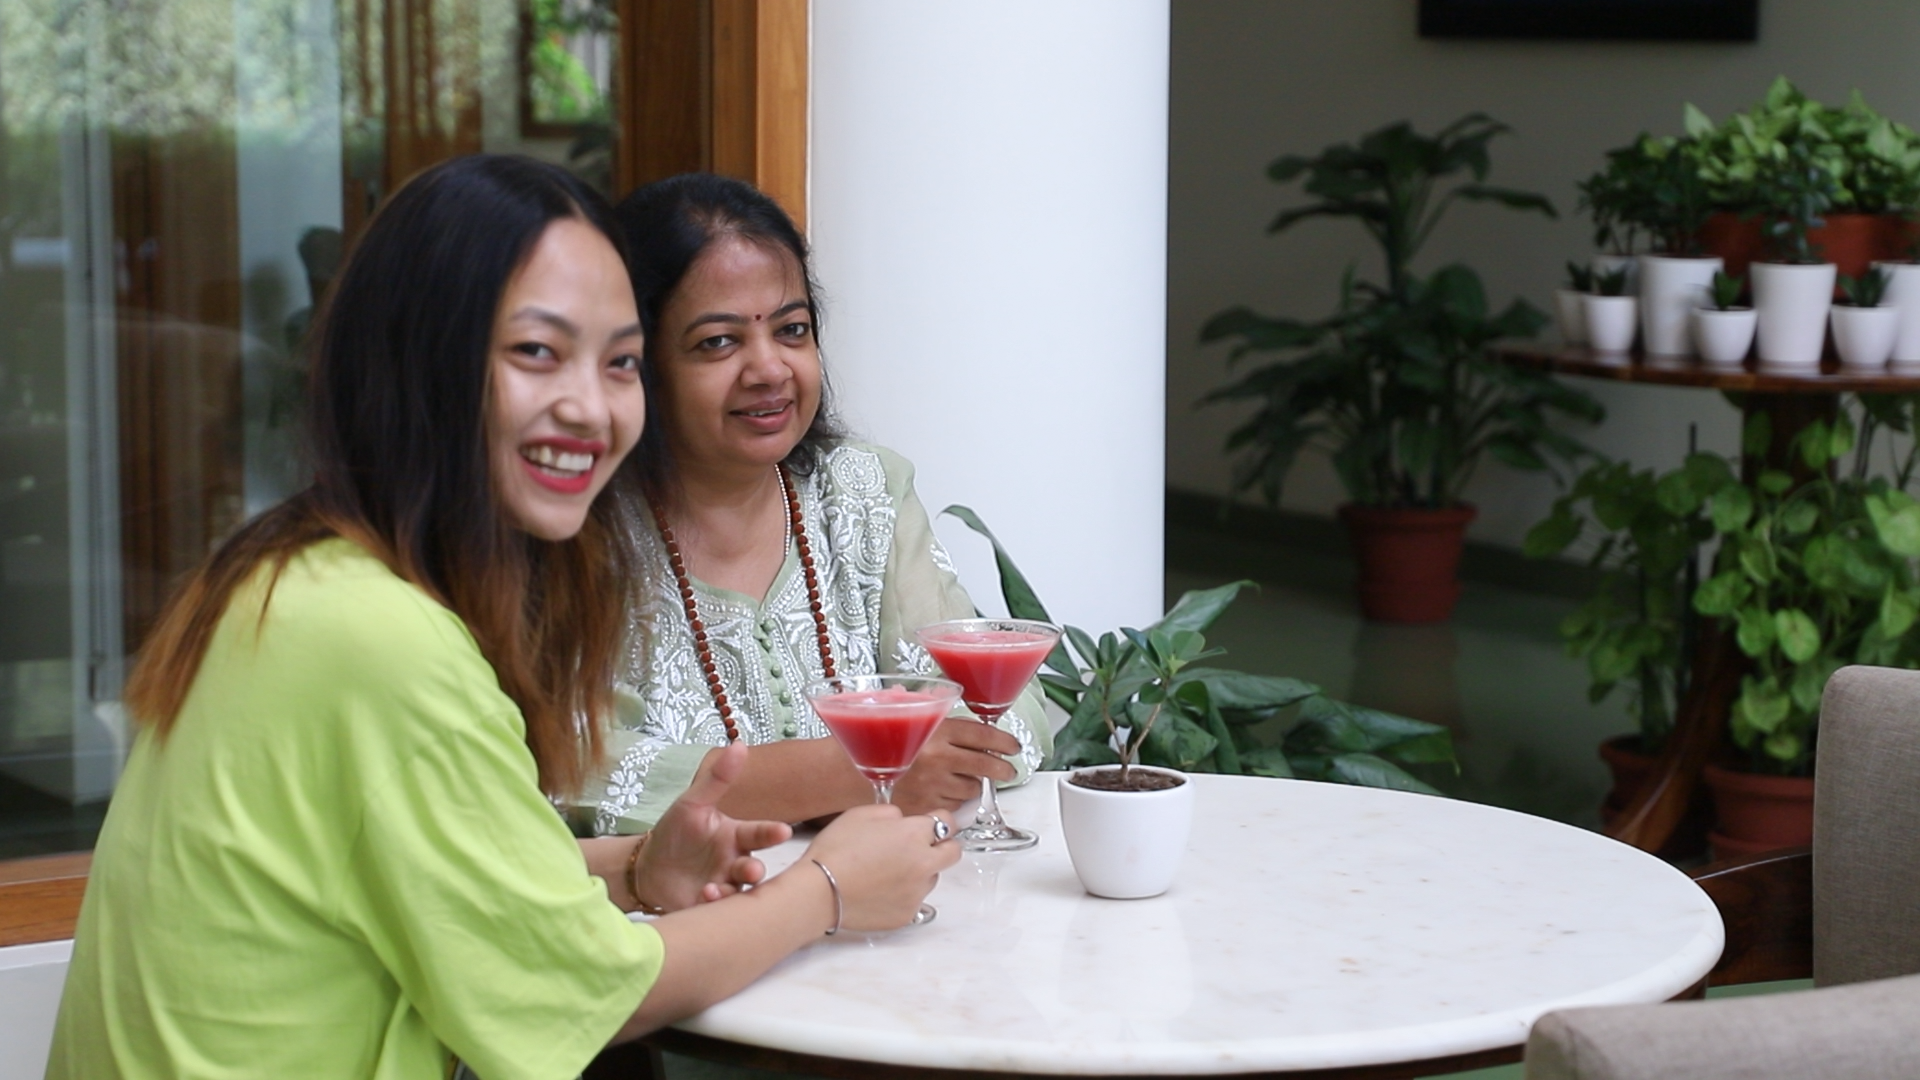 Indulge in holistic well-being this Mother’s Day month at Naad